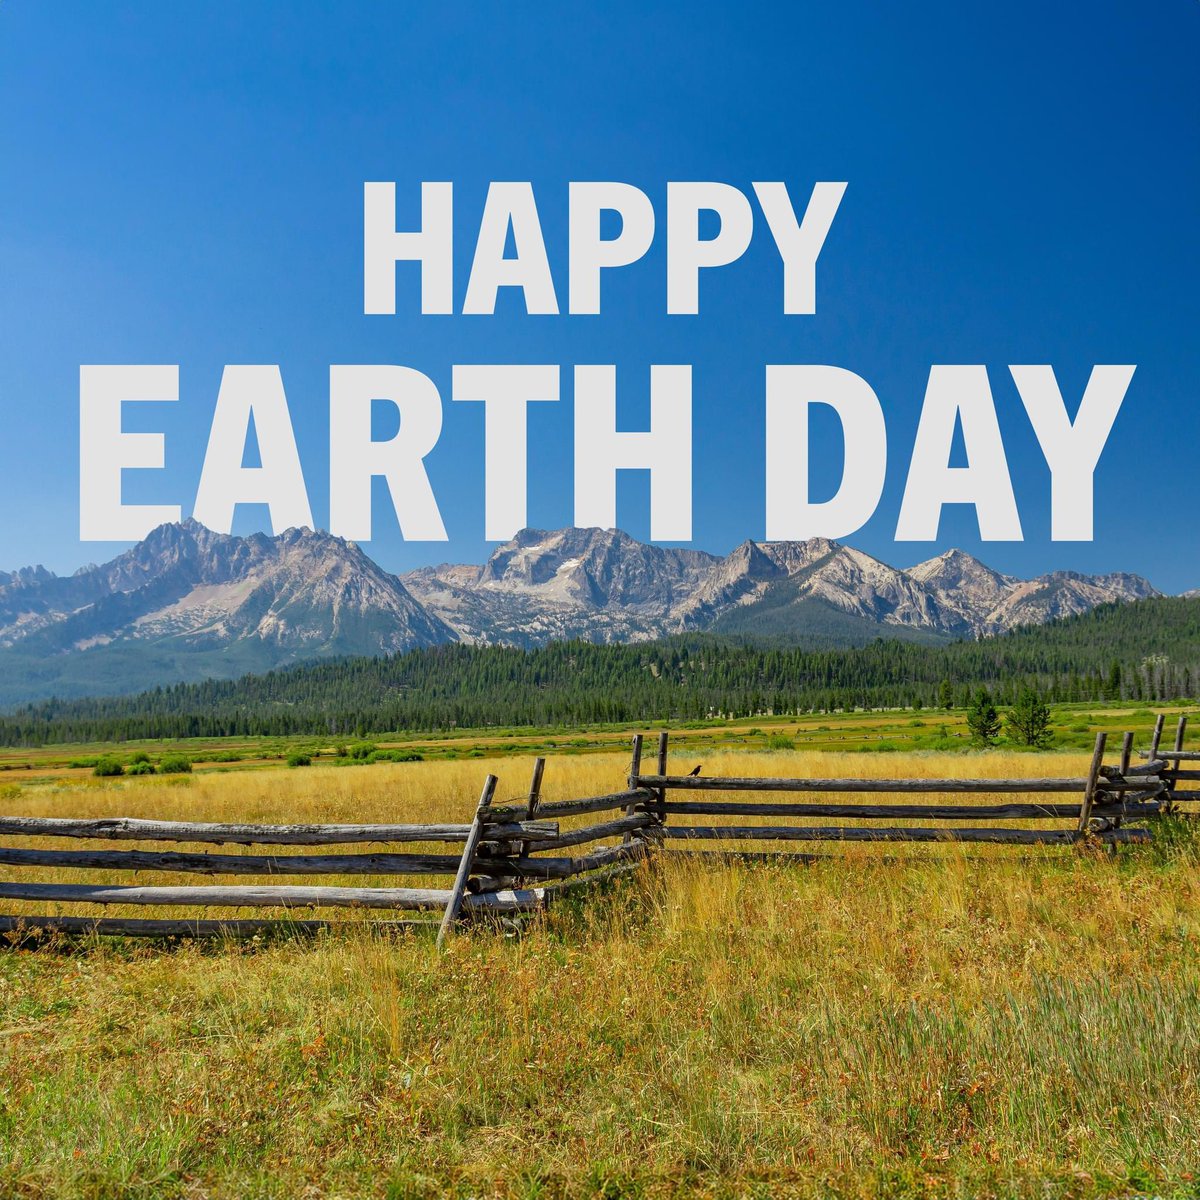 From the lush forests of the Panhandle to the sheer rock cliffs of Hells Canyon, and the high mountain peaks of the Sawtooths, we value Idaho's natural spaces and honor our commitment to future generations. Happy Earth Day!